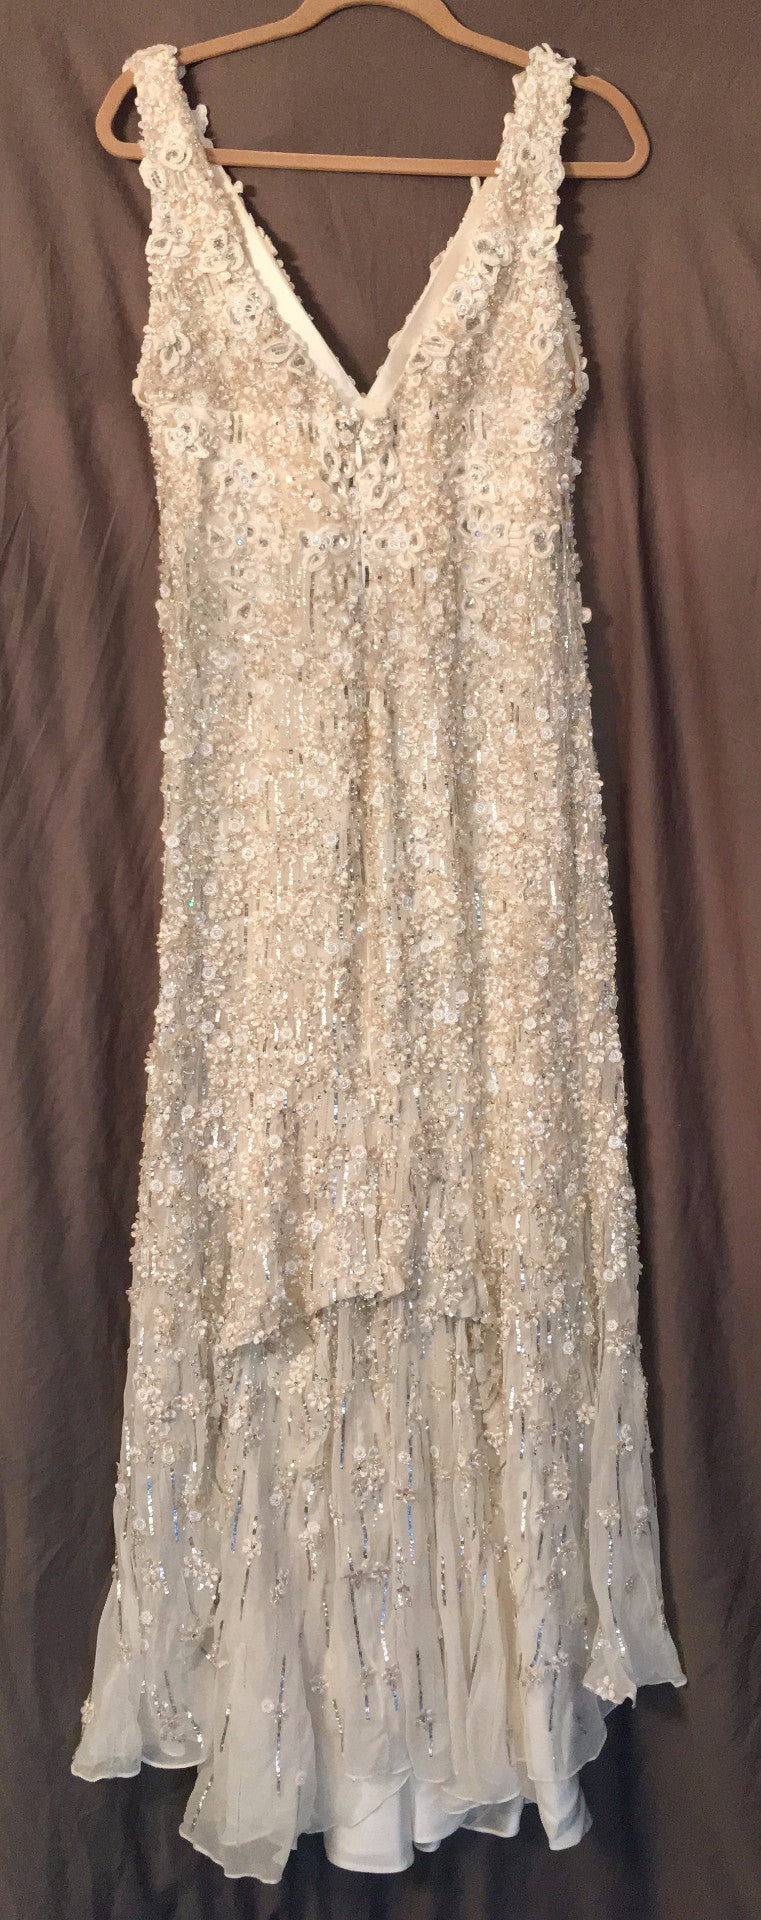 Monique Lhuillier 'Chandler' size 8 used wedding dress front view on hanger